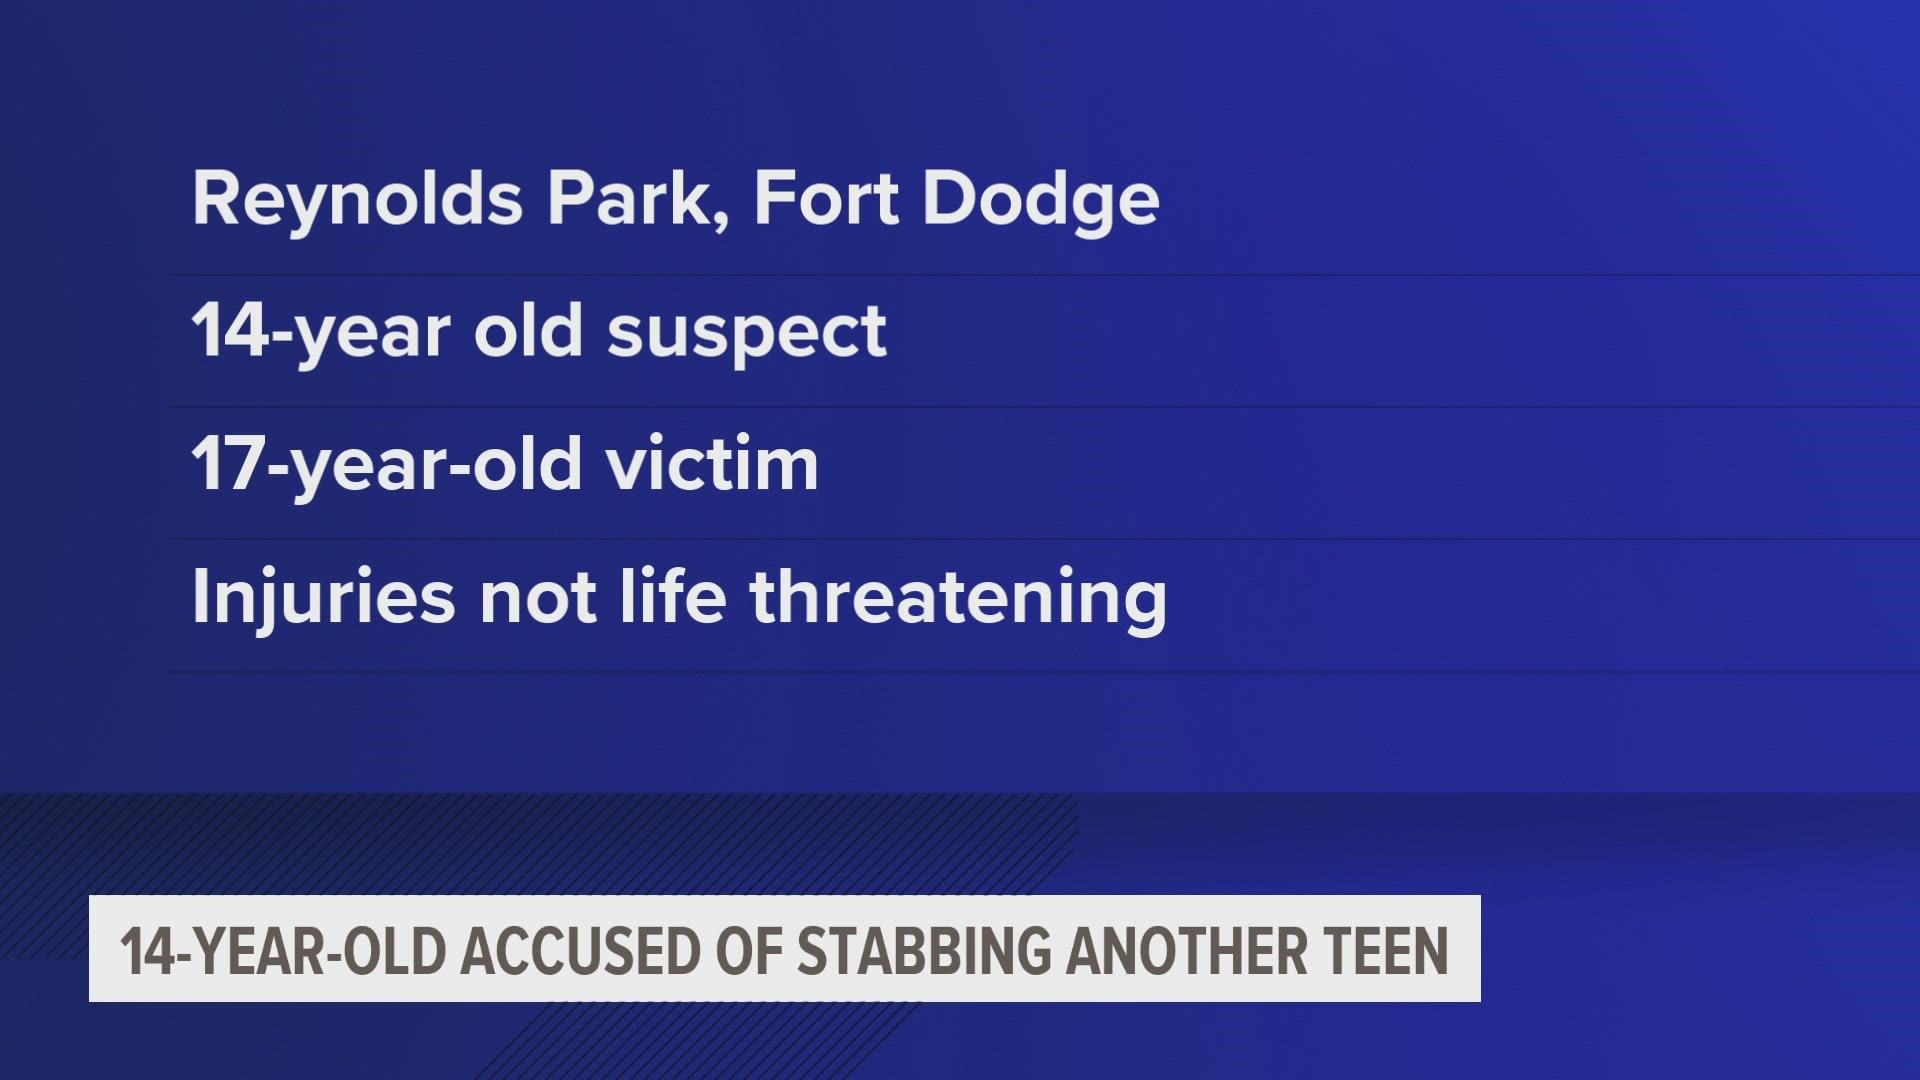 The 14-year-old suspect has been arrested and charged after stabbing a 17-year-old during a fight, the Fort Dodge Police Department said in a press release.